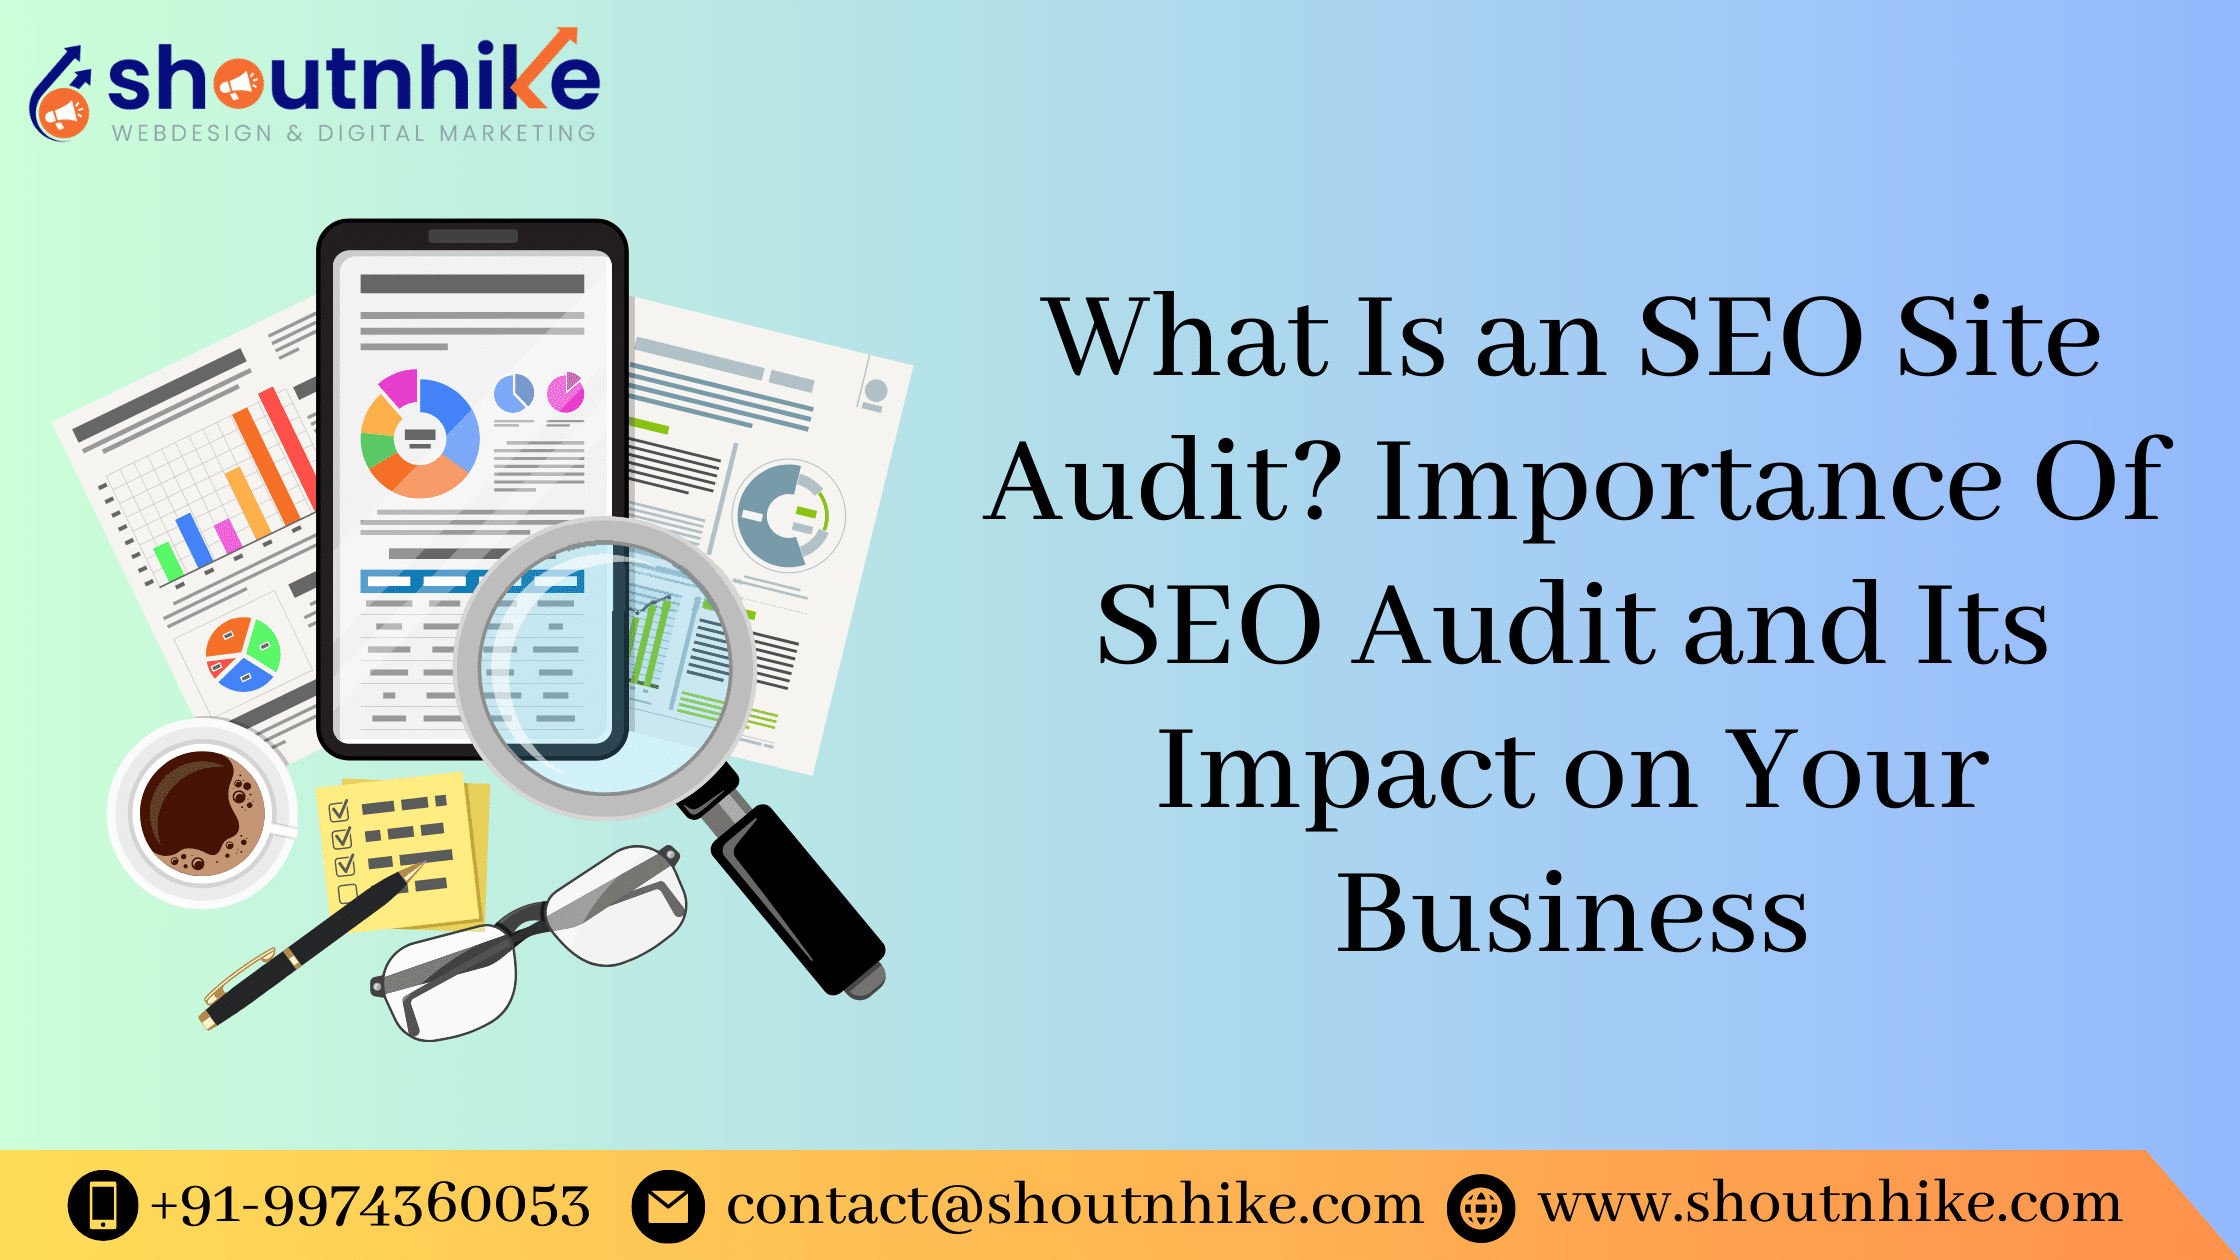 What Is an SEO Site Audit? Importance Of SEO Audit and Its Impact on Your Business